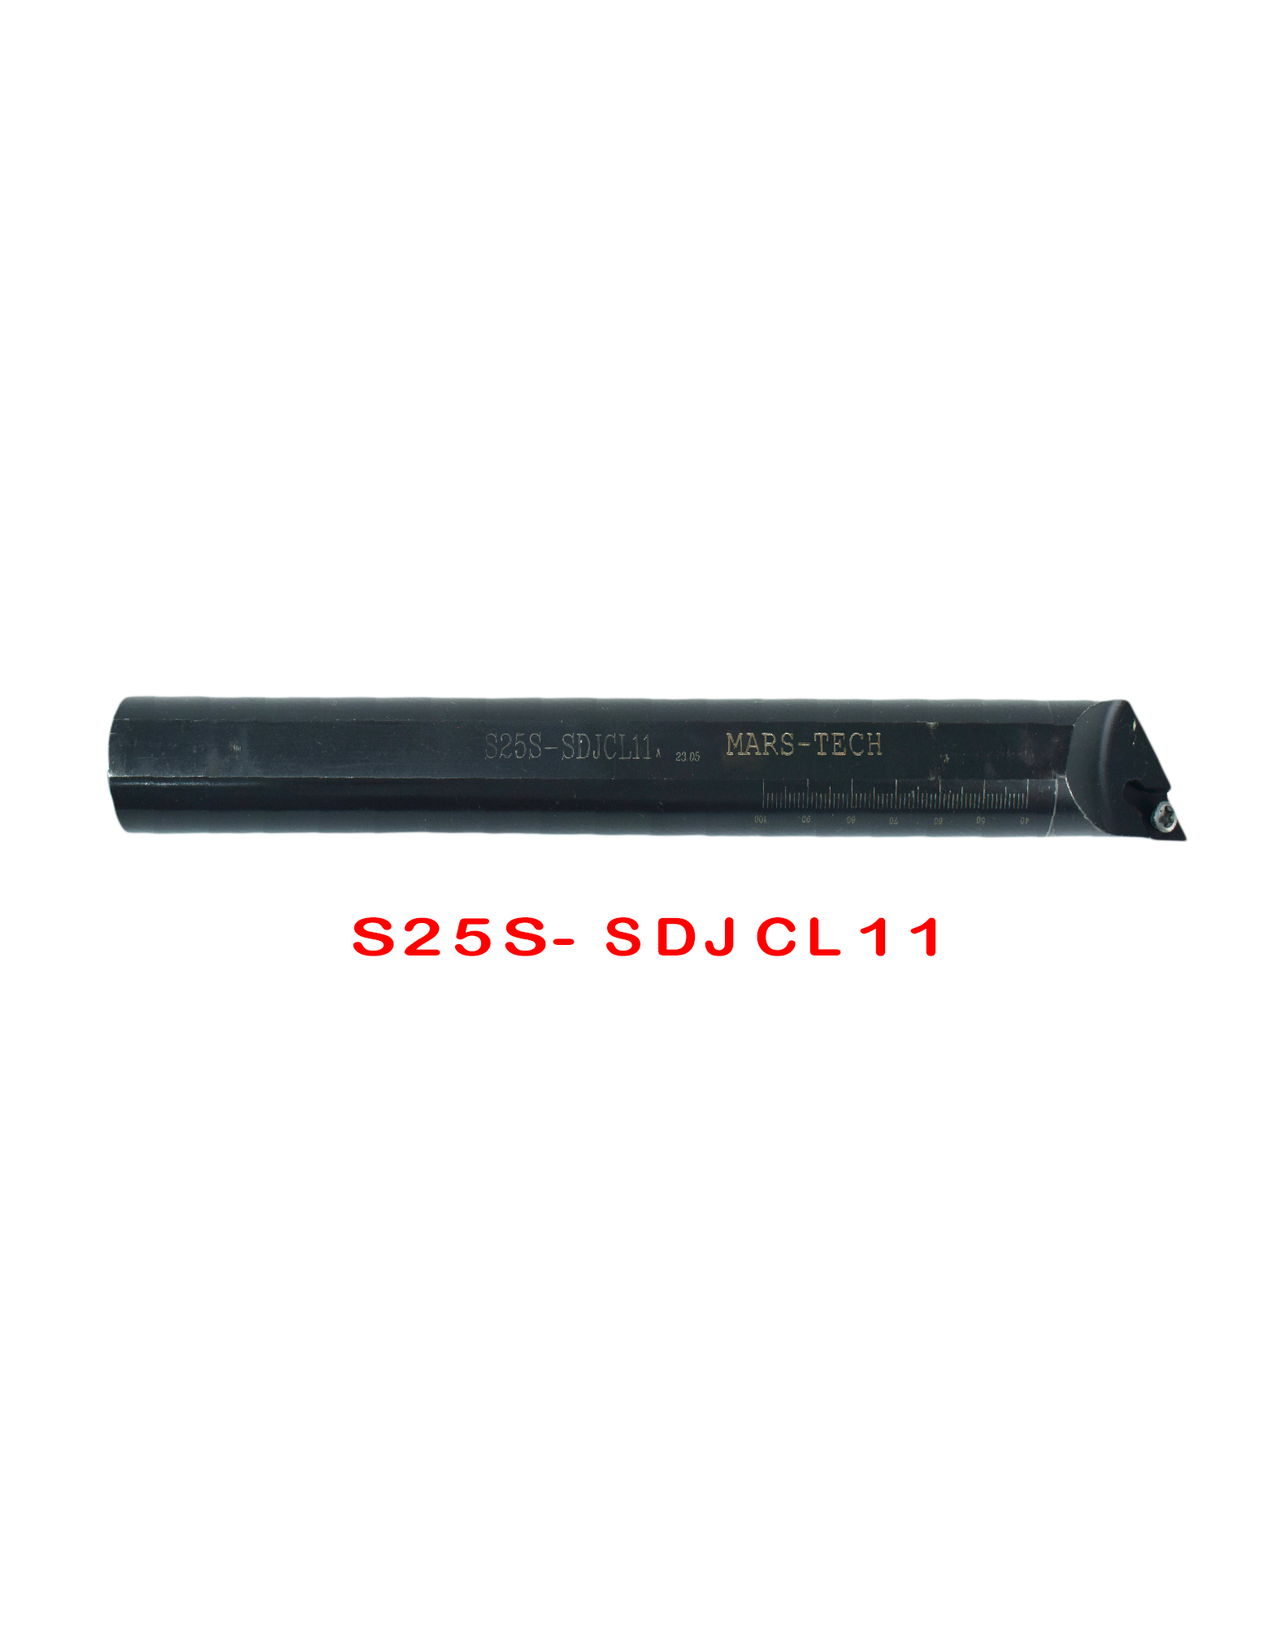 SDJCL/R Boring bar suitable to Dcmt0702/Dcmt11t3 pack of 1